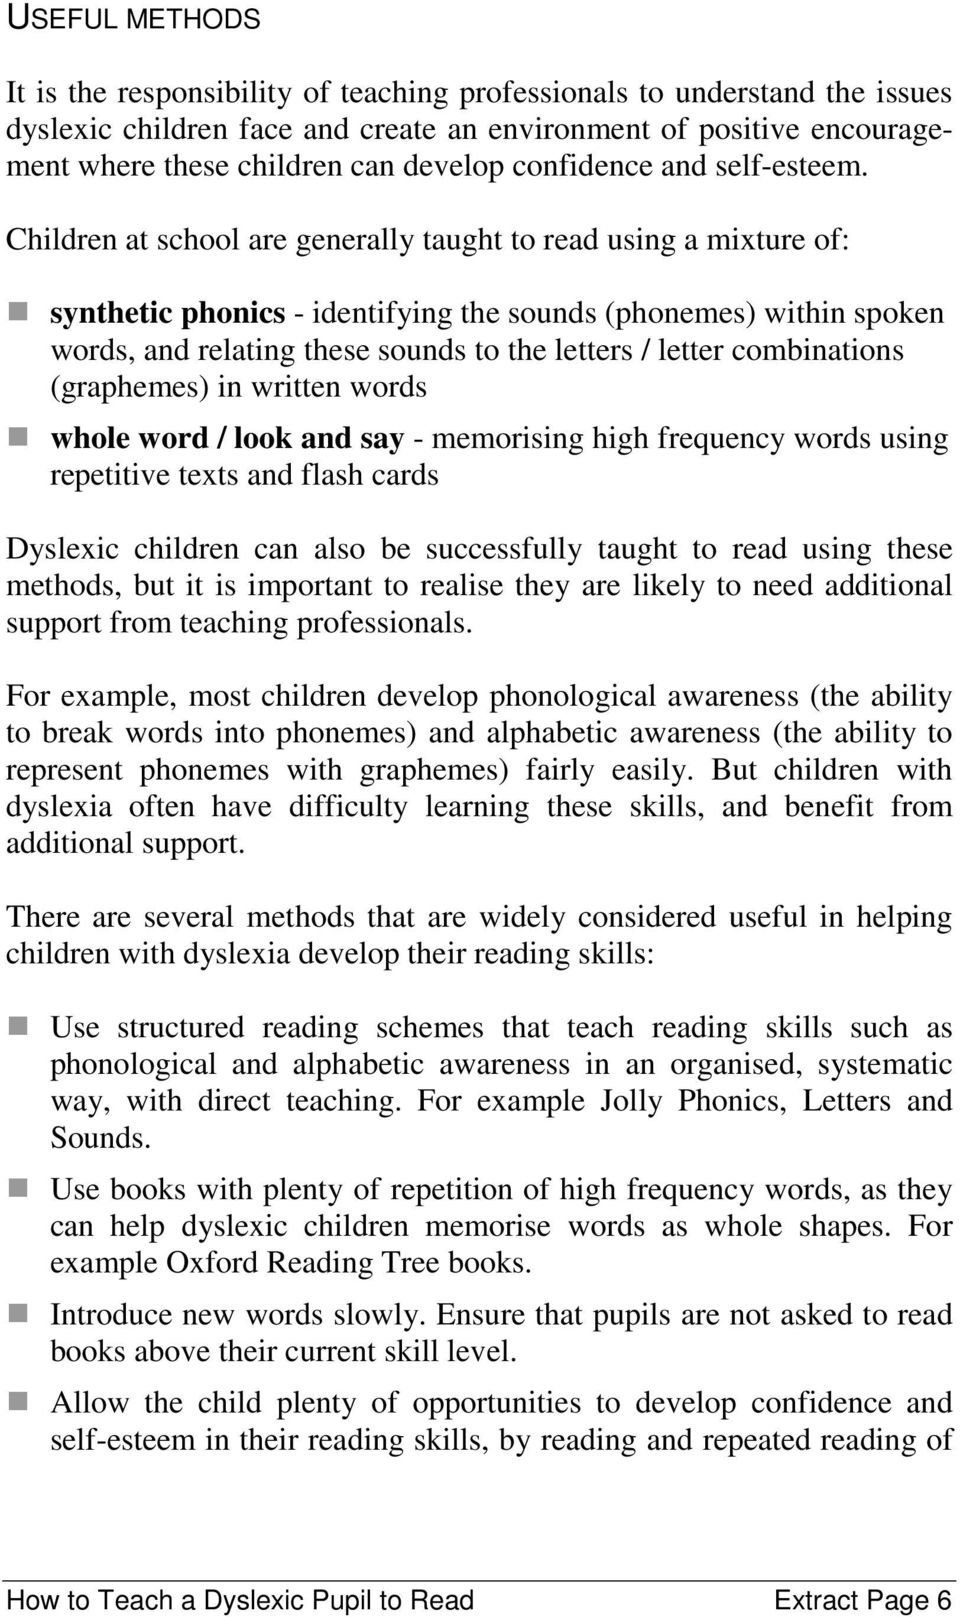 Children at school are generally taught to read using a mixture of: synthetic phonics - identifying the sounds (phonemes) within spoken words, and relating these sounds to the letters / letter